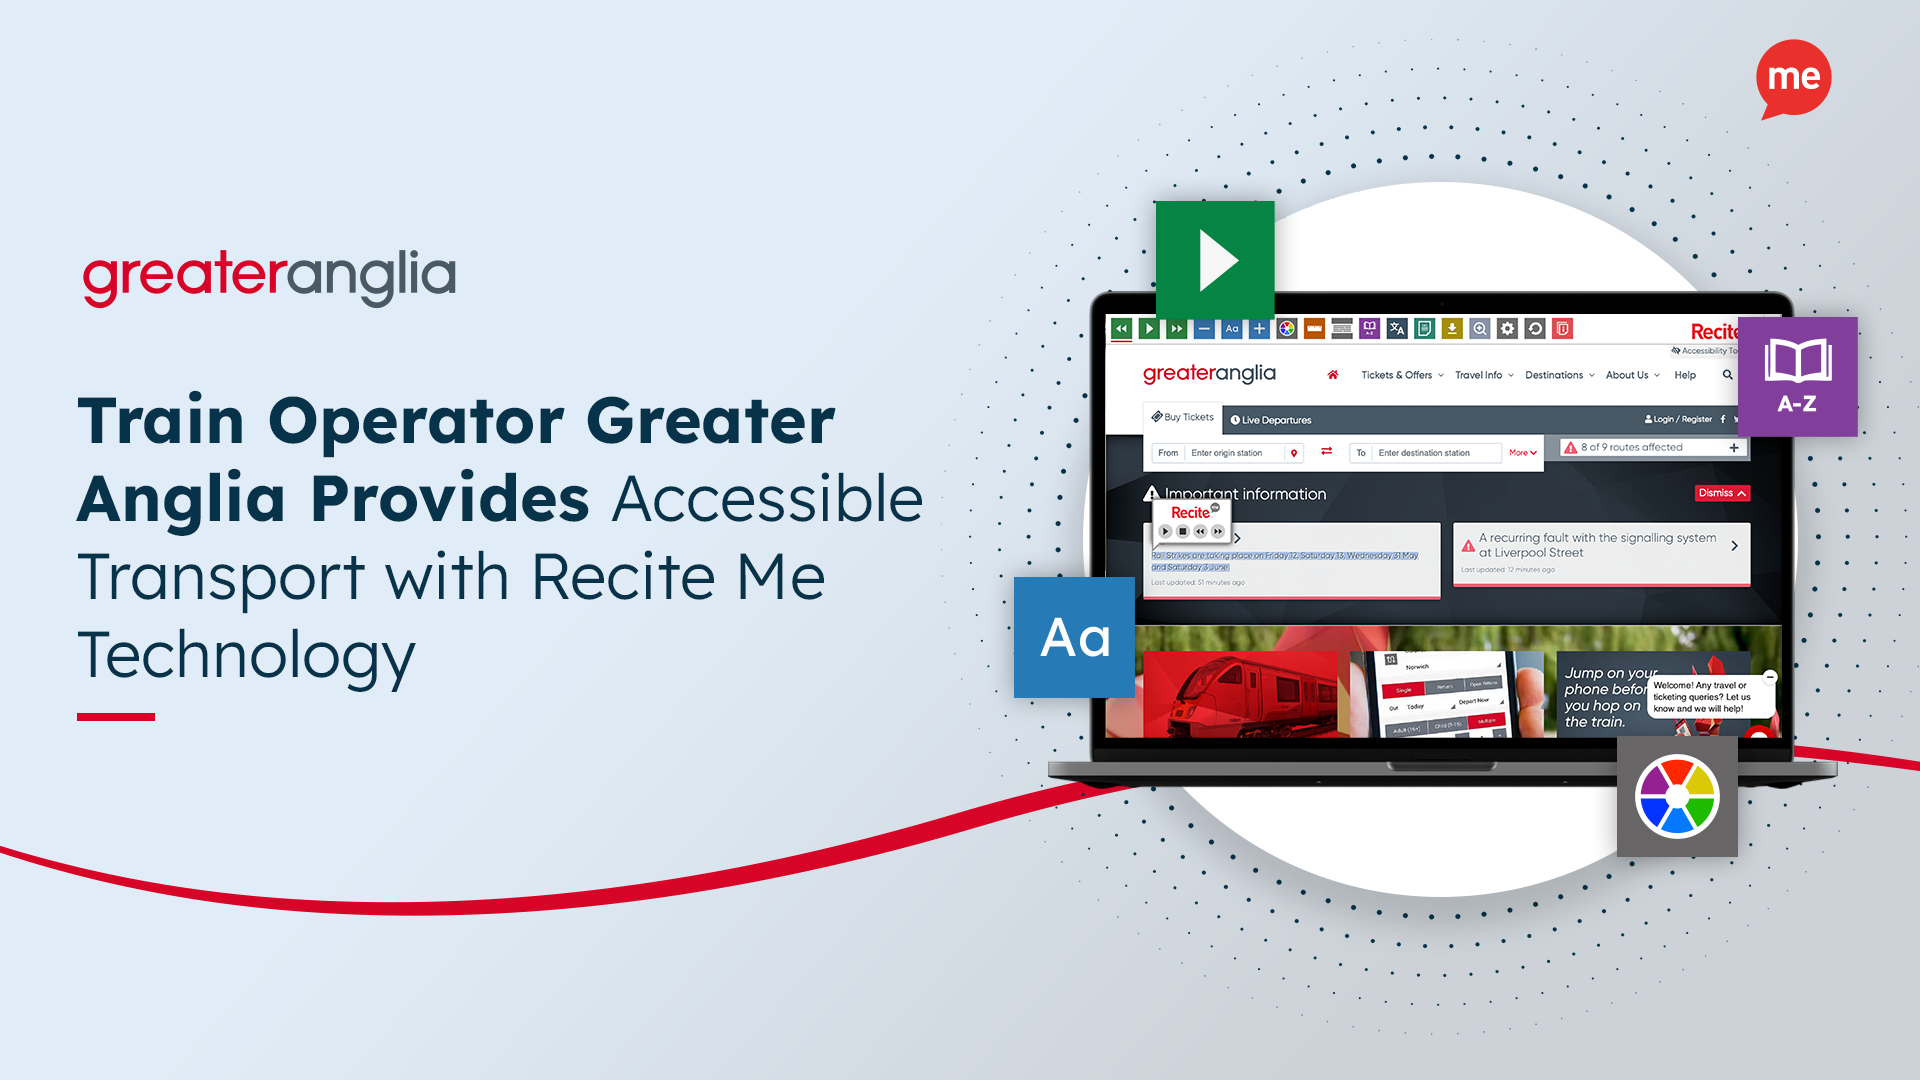 Train Operator Greater Anglia Provides Accessible Transport with Recite Me Technology